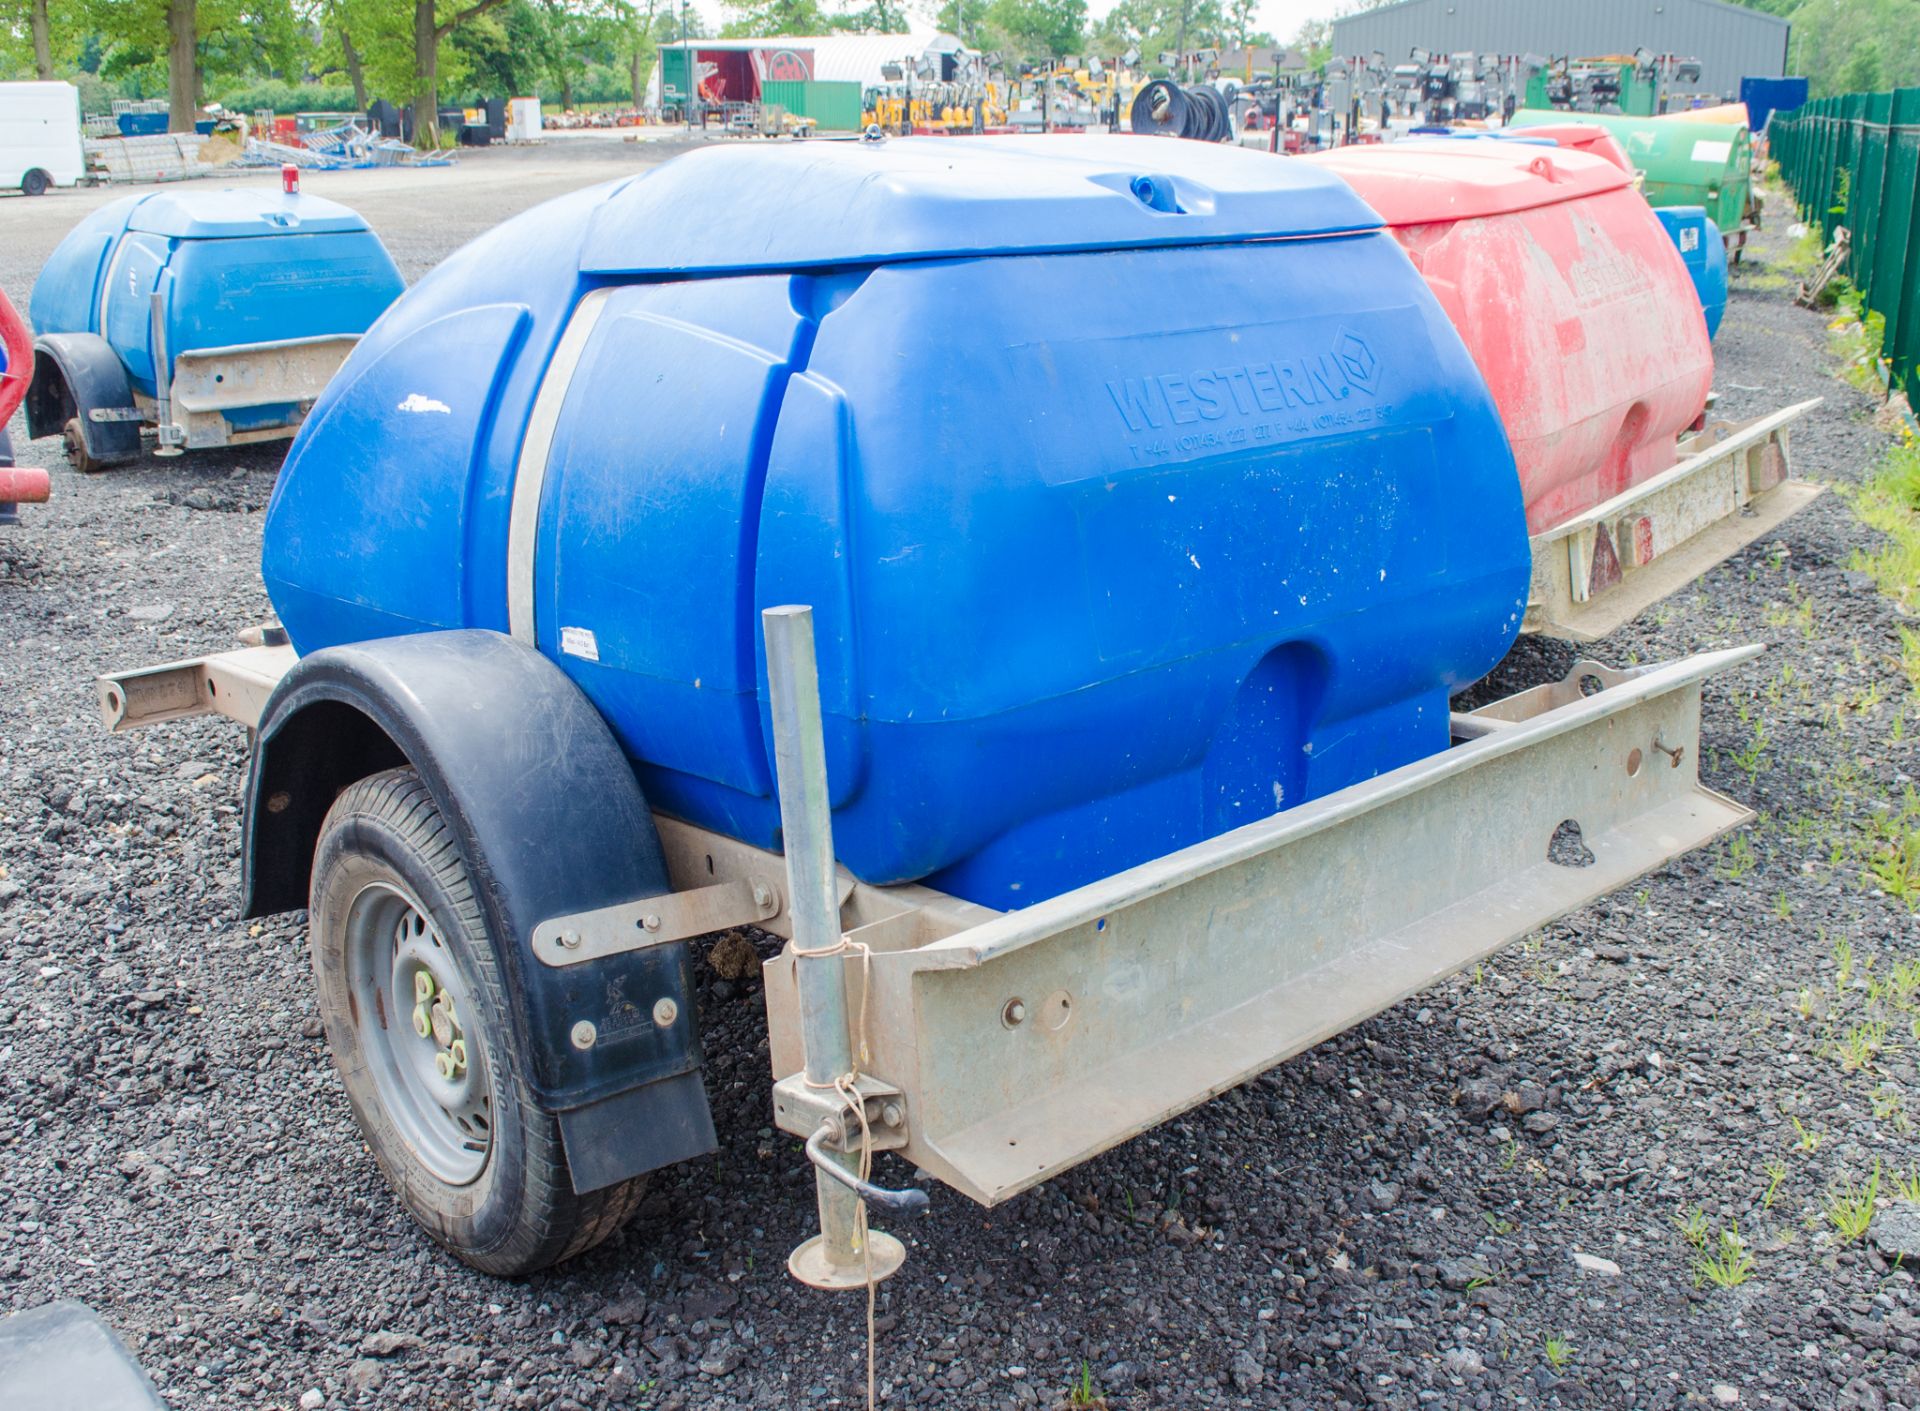 Western fast tow water bowser - Image 2 of 2